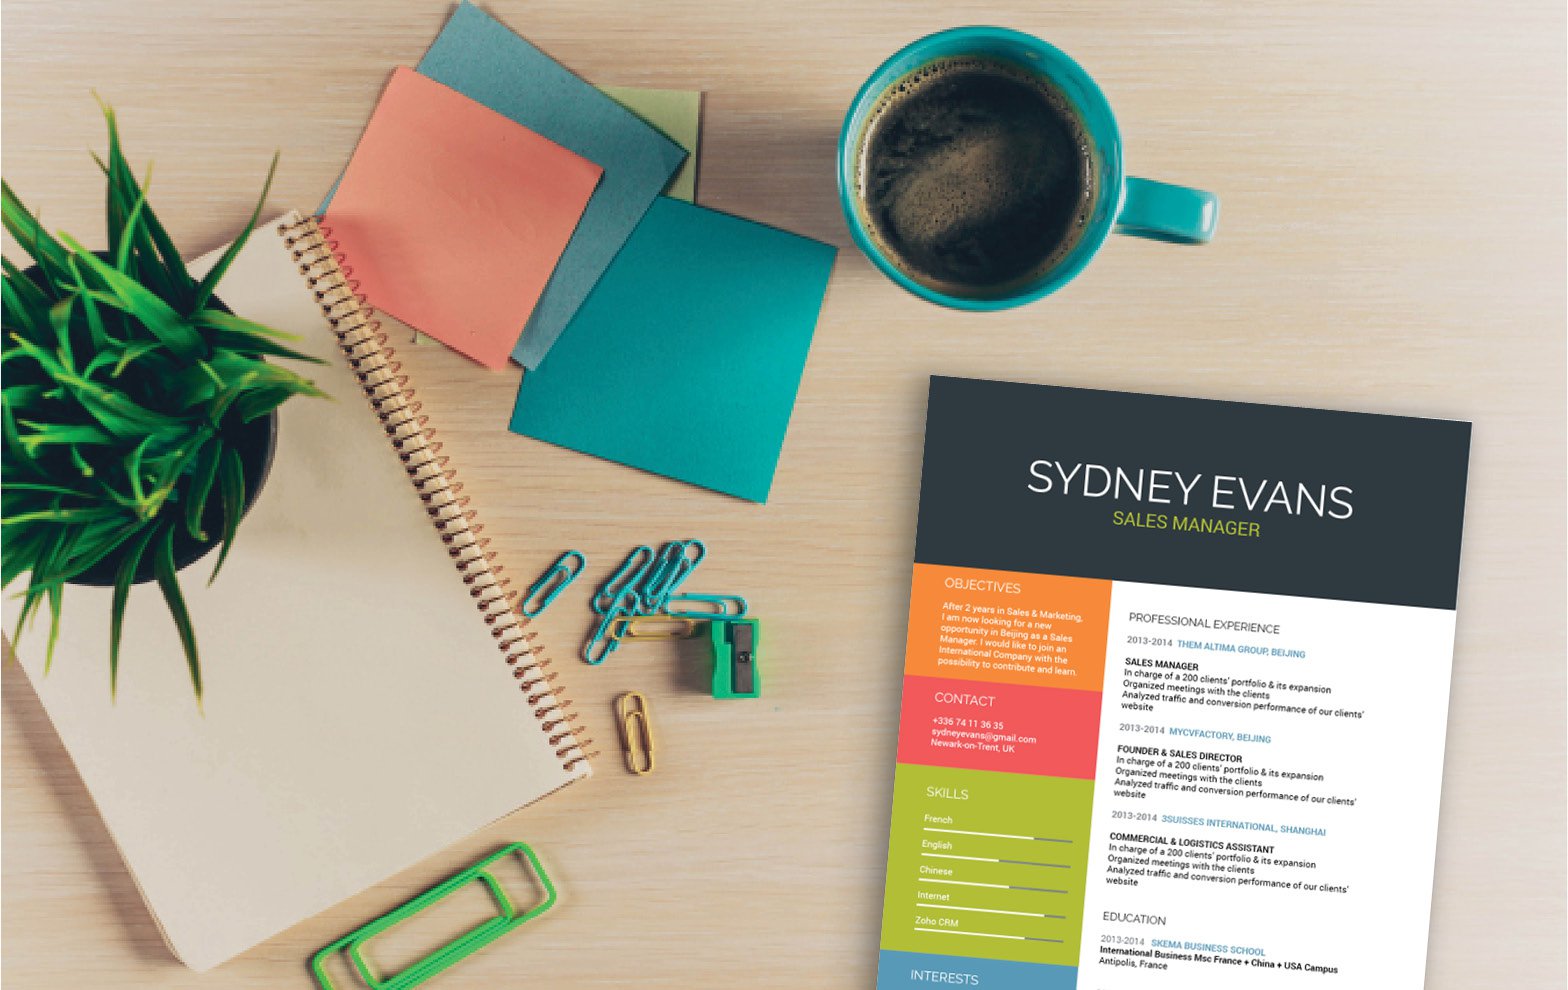 The colors and styles used in this template make for clean and great resume